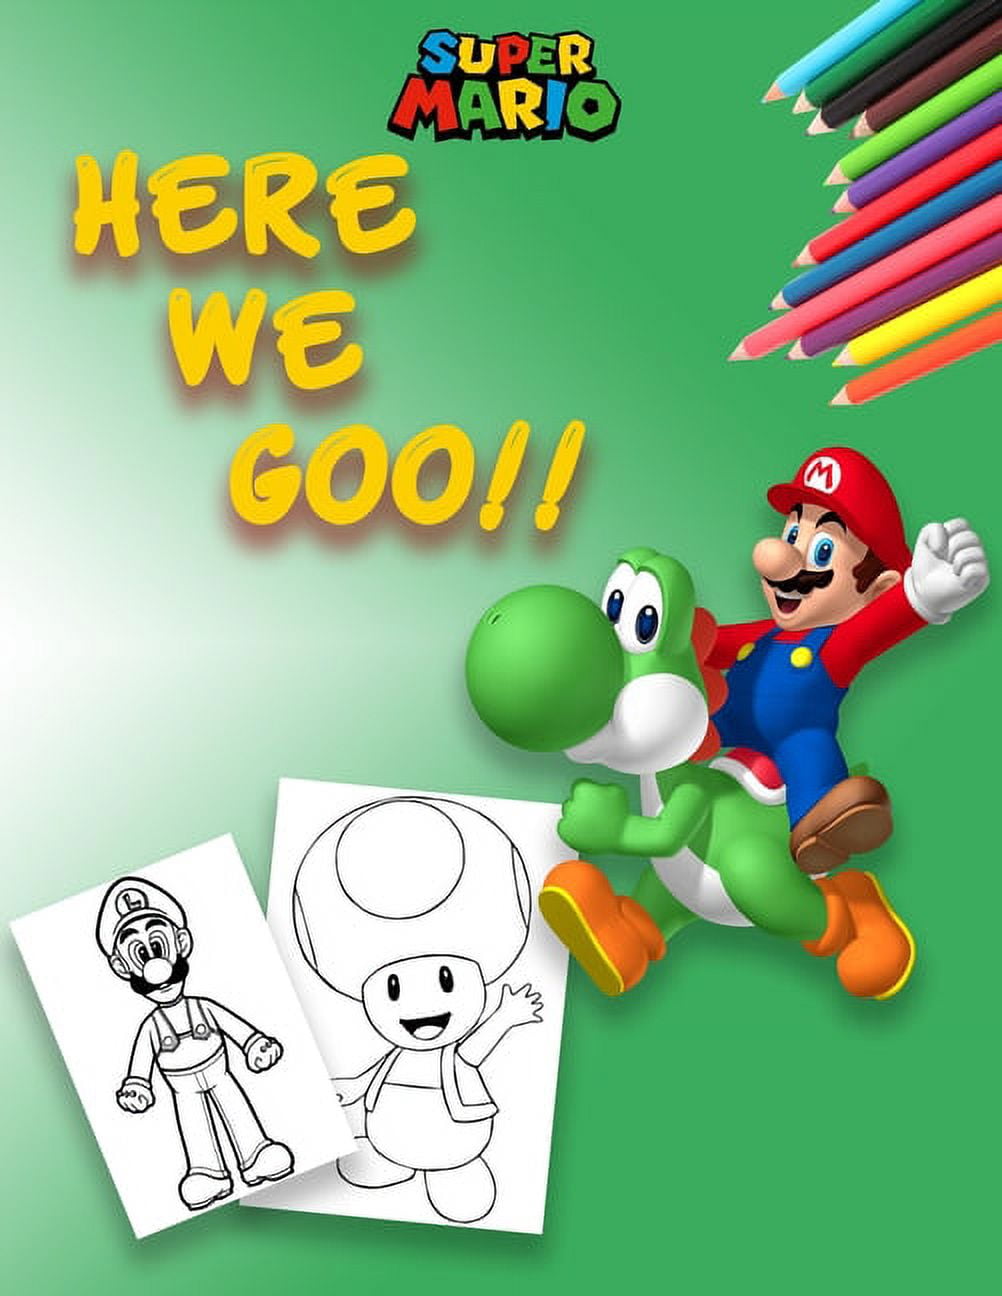 super mario here we goo!! : super mario coloring book / 50+ Illustrations  Mario Brothers Coloring Books for Kids / Ideal Gift For Those Who Love  Super Mario Bros / 50 pages / 8.5*11 inches (Paperback) 